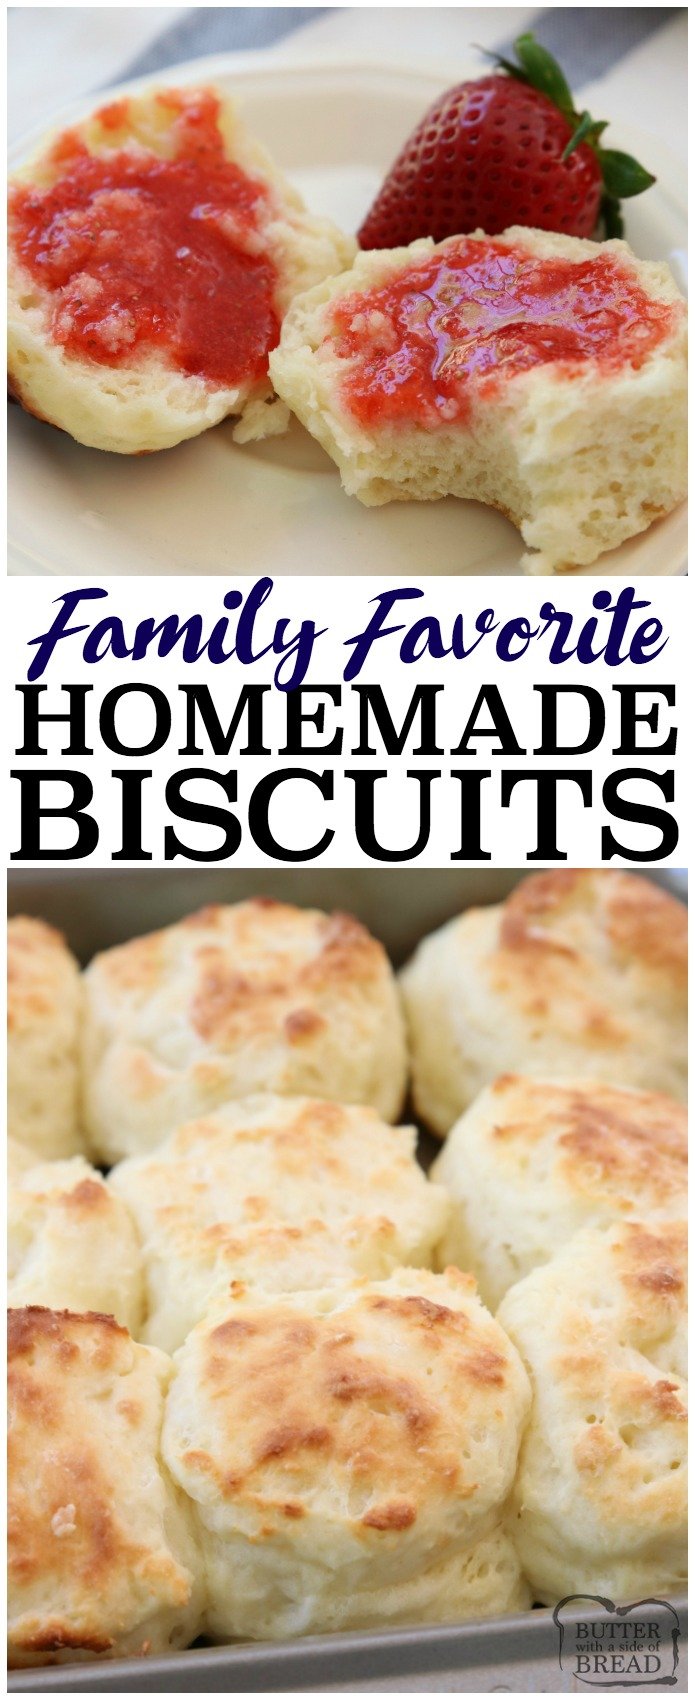 Easy Sour Cream Biscuit Recipe made from scratch in minutes with common ingredients. Perfect soft, flaky texture with fantastic butter flavor. This will be your new favorite biscuit recipe! #homemade #biscuit #recipe #biscuits #bake #food #dinner #bread #quickbread from BUTTER WITH A SIDE OF BREAD